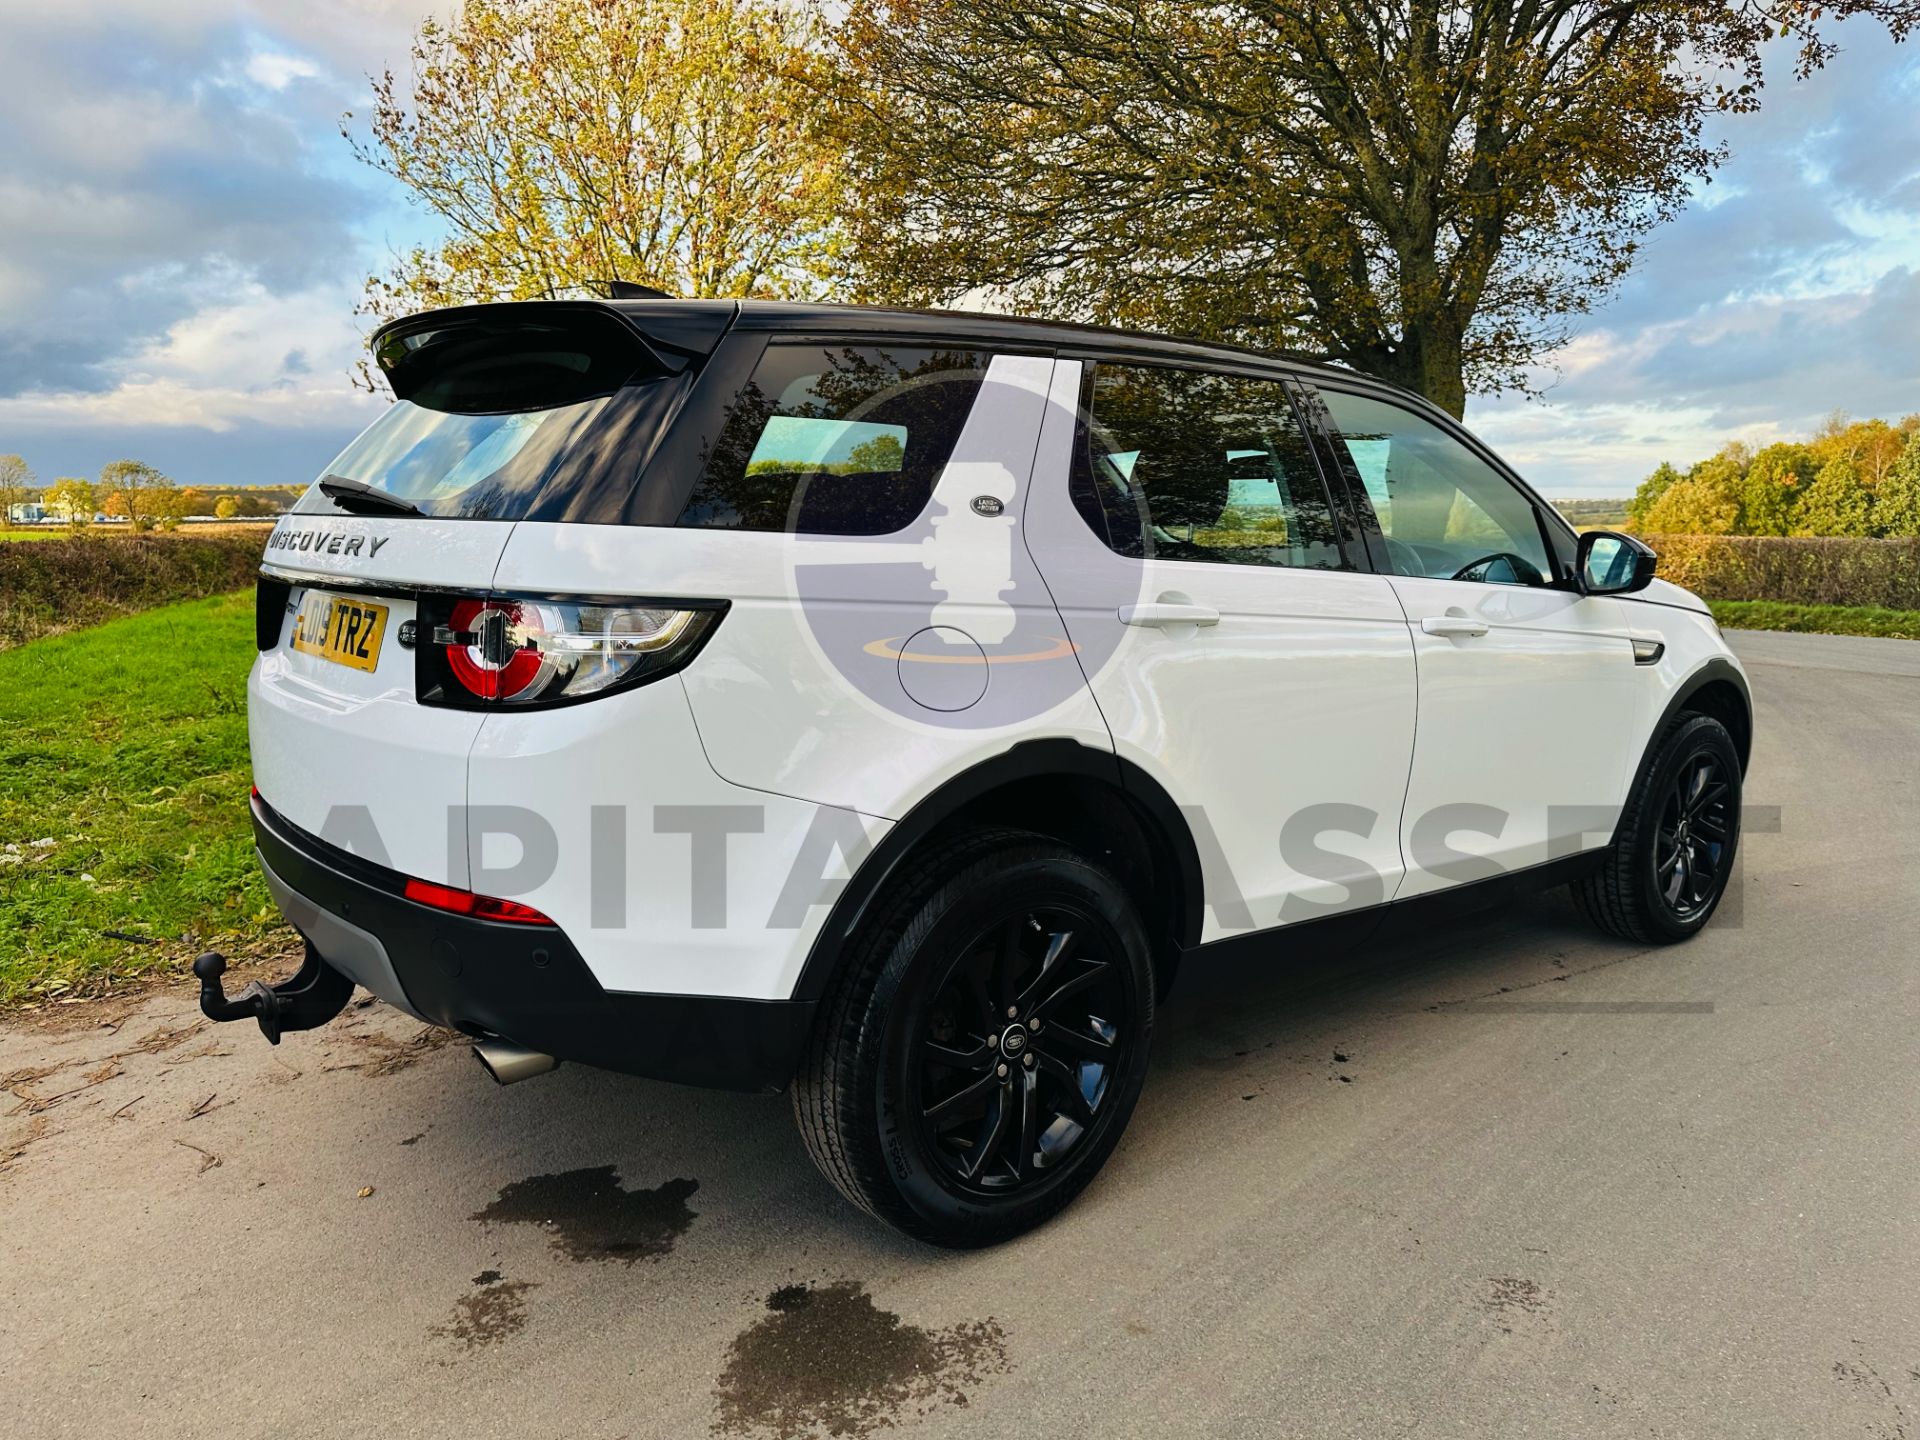 (On Sale) LAND ROVER DISCOVERY SPORT *SE* 5 DOOR SUV (2019 - EURO 6) 2.0 ED4 - AUTO STOP/START - Image 13 of 38